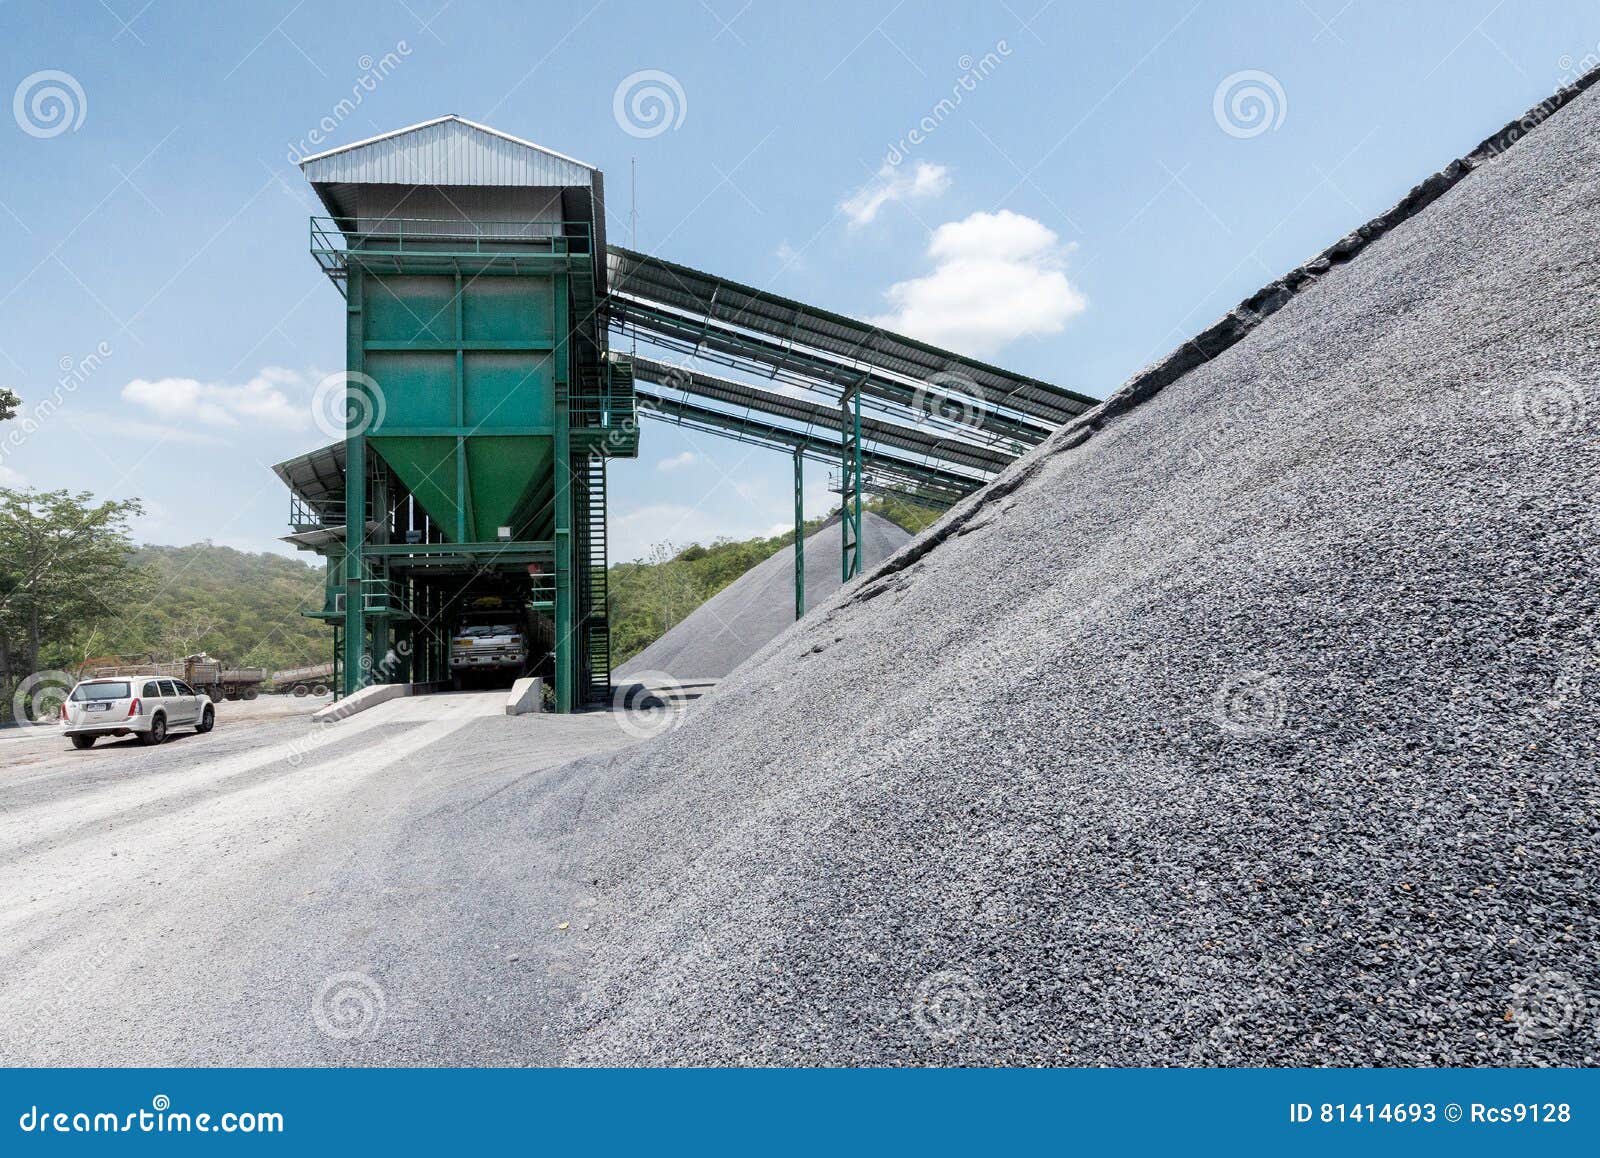 Cement quarry editorial stock photo. Image of desalination - 81414693